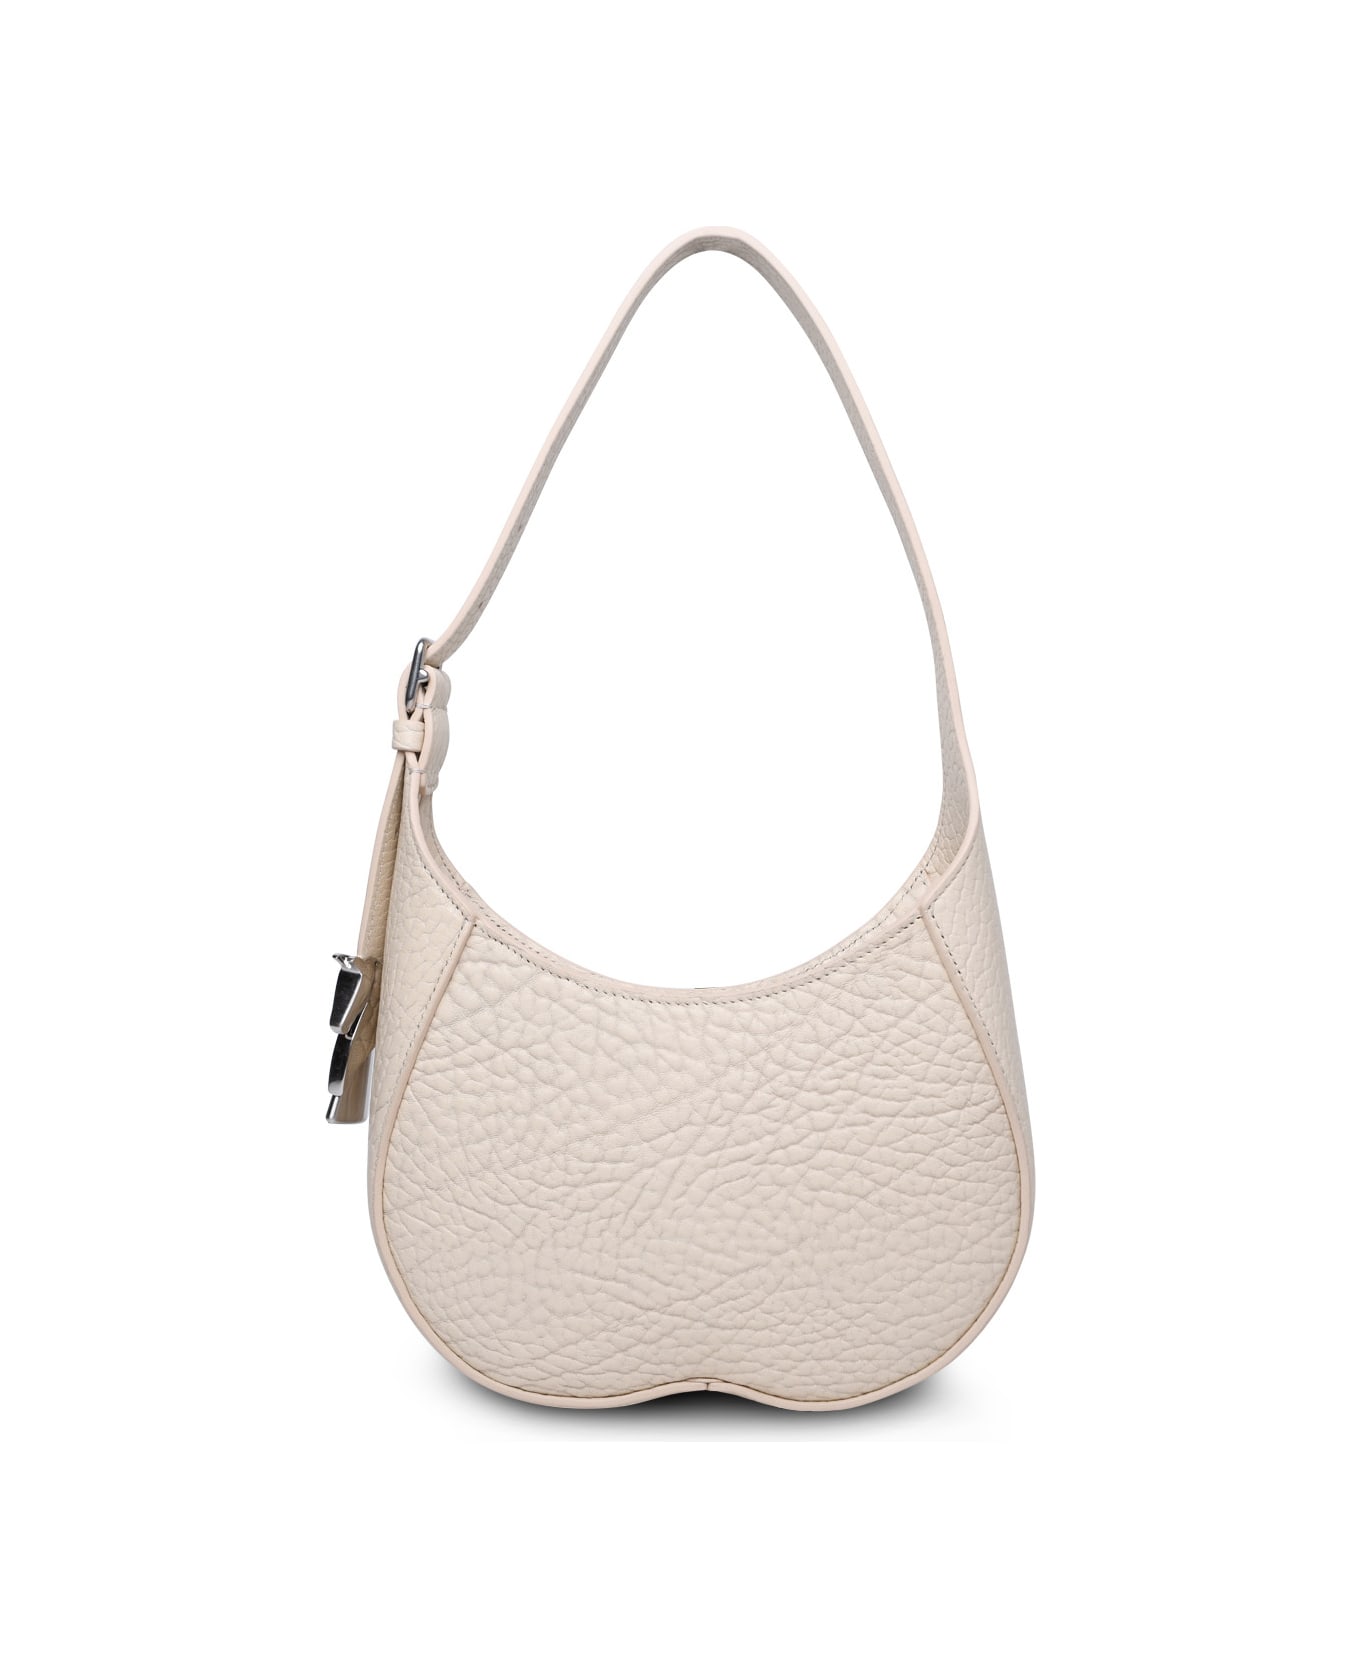 Burberry Small 'chess' Ivory Leather Bag - Avorio